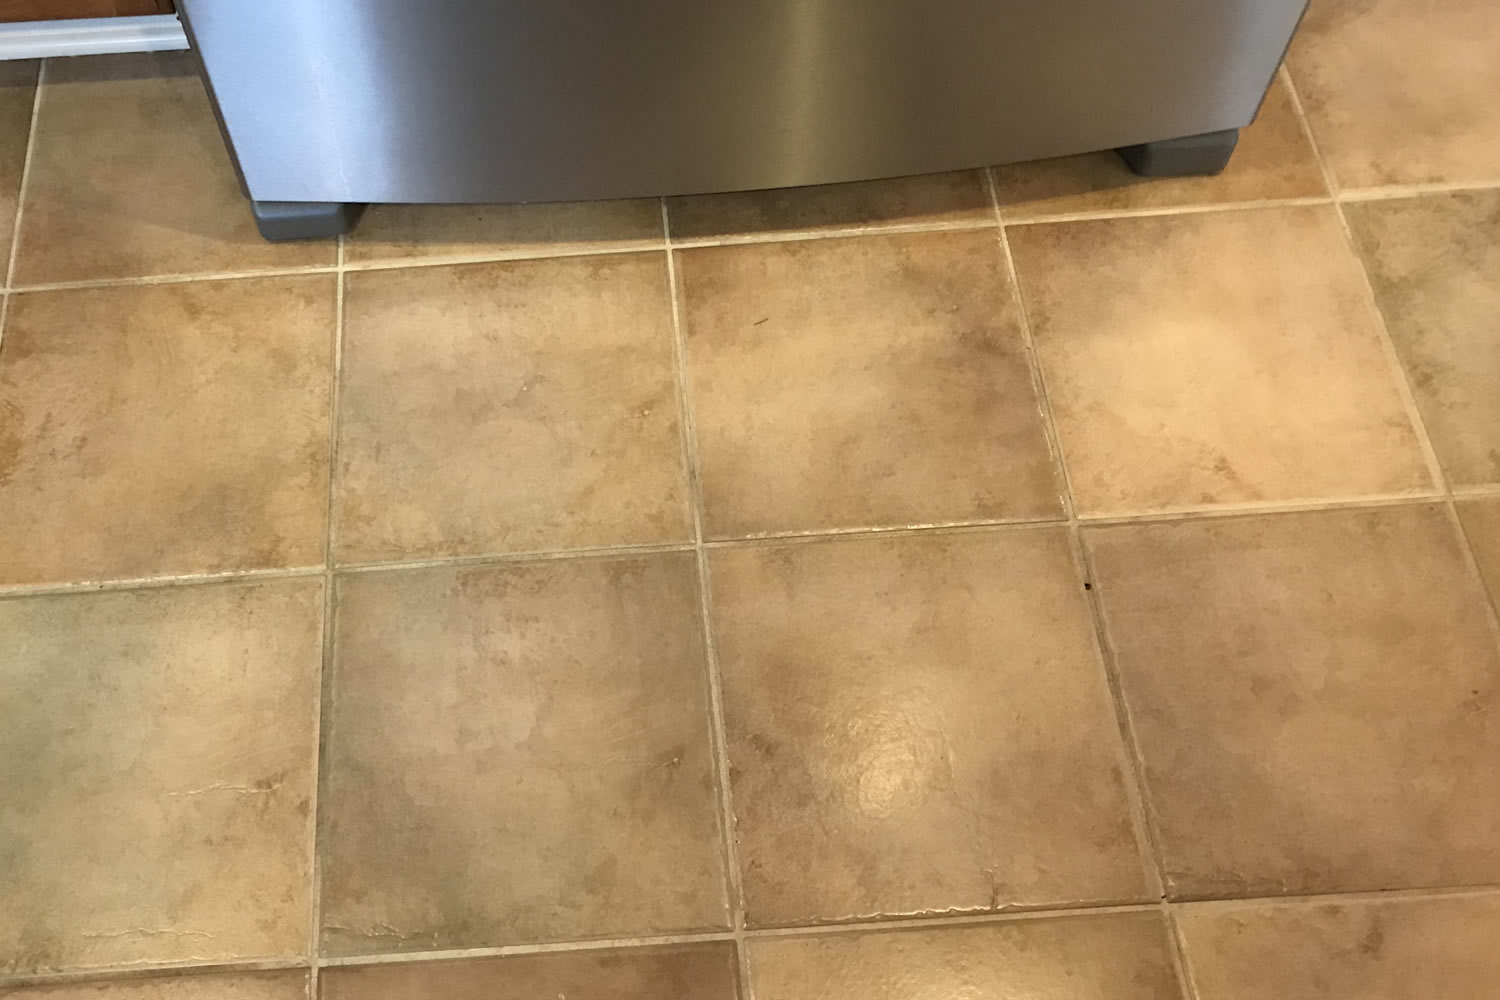 carolina-clean-pro-carpet-cleaning-upholstery-tile-grout-cleaning-hard-floor-hardwood-floor-cleaning-service-for-Garner-Raleigh-Cary-Clayton-Smithfield-Johnston-County-Wake-County-NC-32